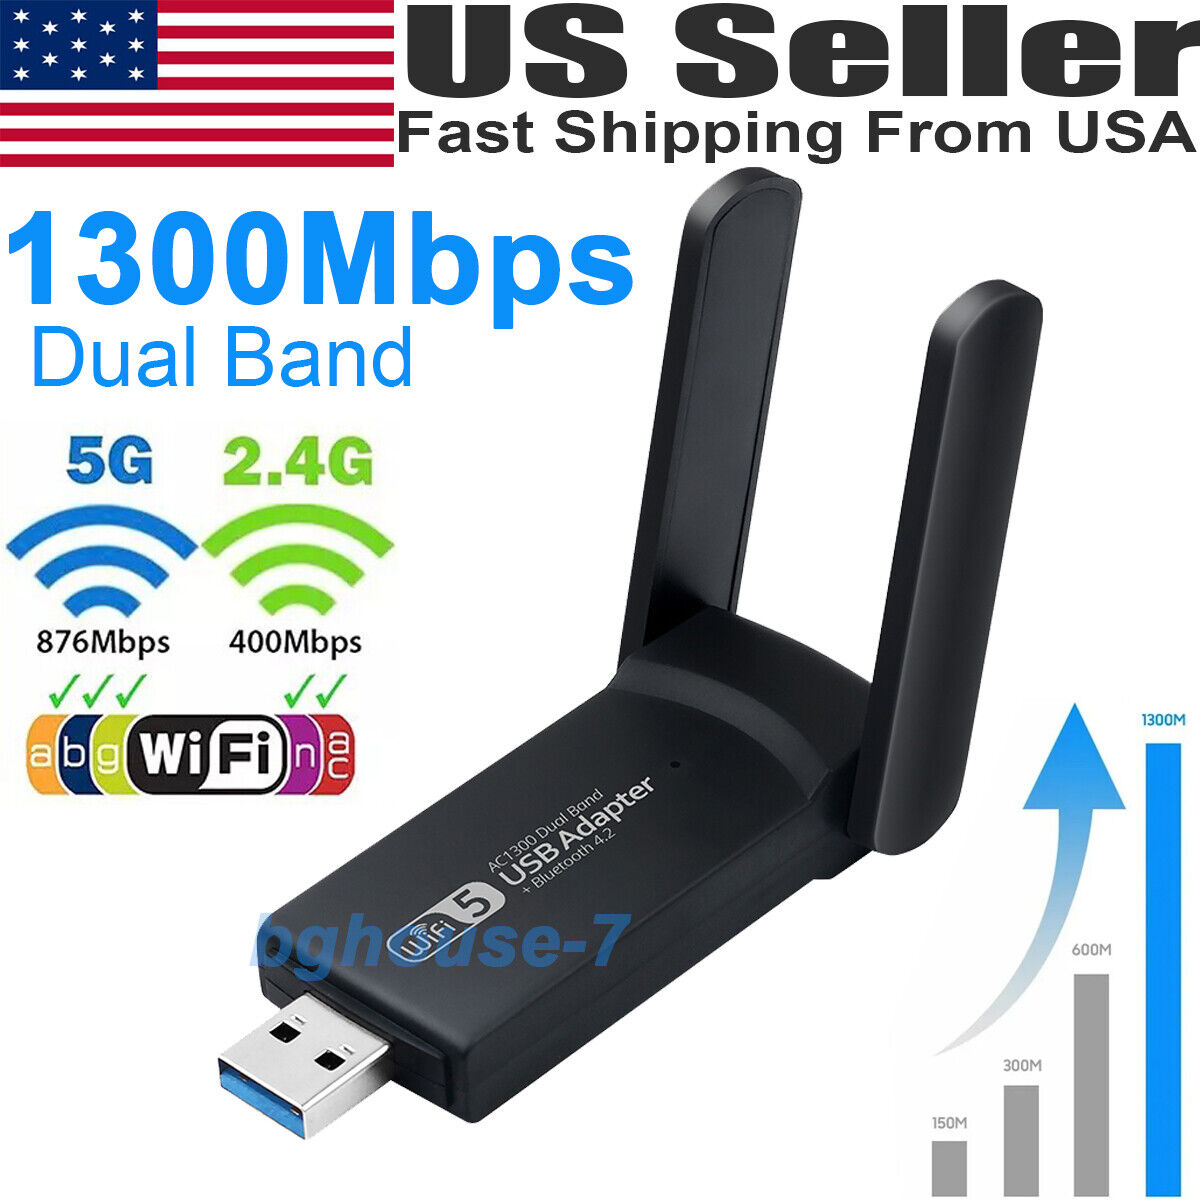 USB 3.0 Wireless Wifi Network Adapter 1300Mbp Long Range Dual Band for PC Laptop